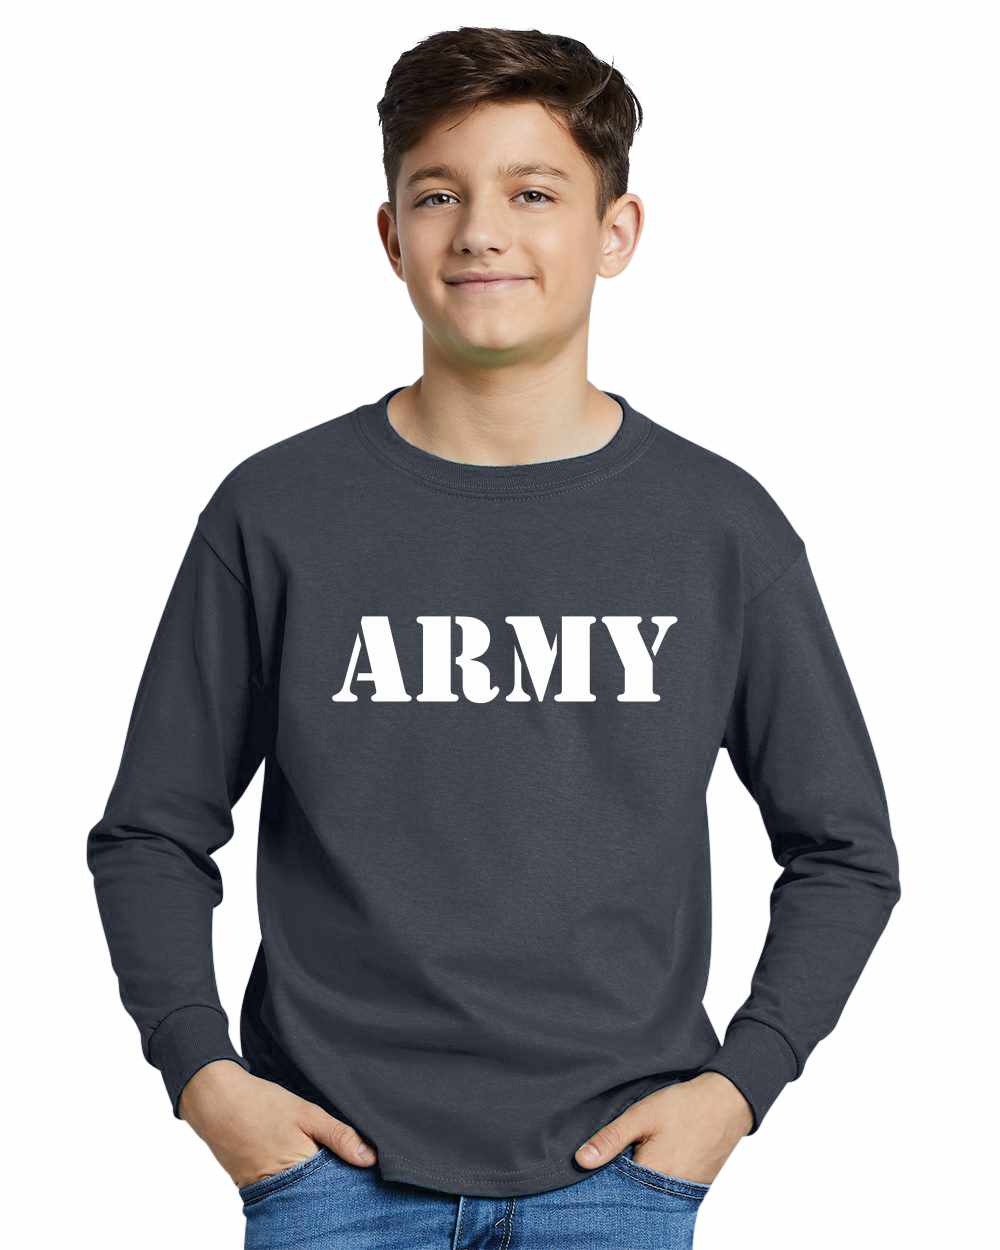 ARMY on Youth Long Sleeve Shirt (#338-203)